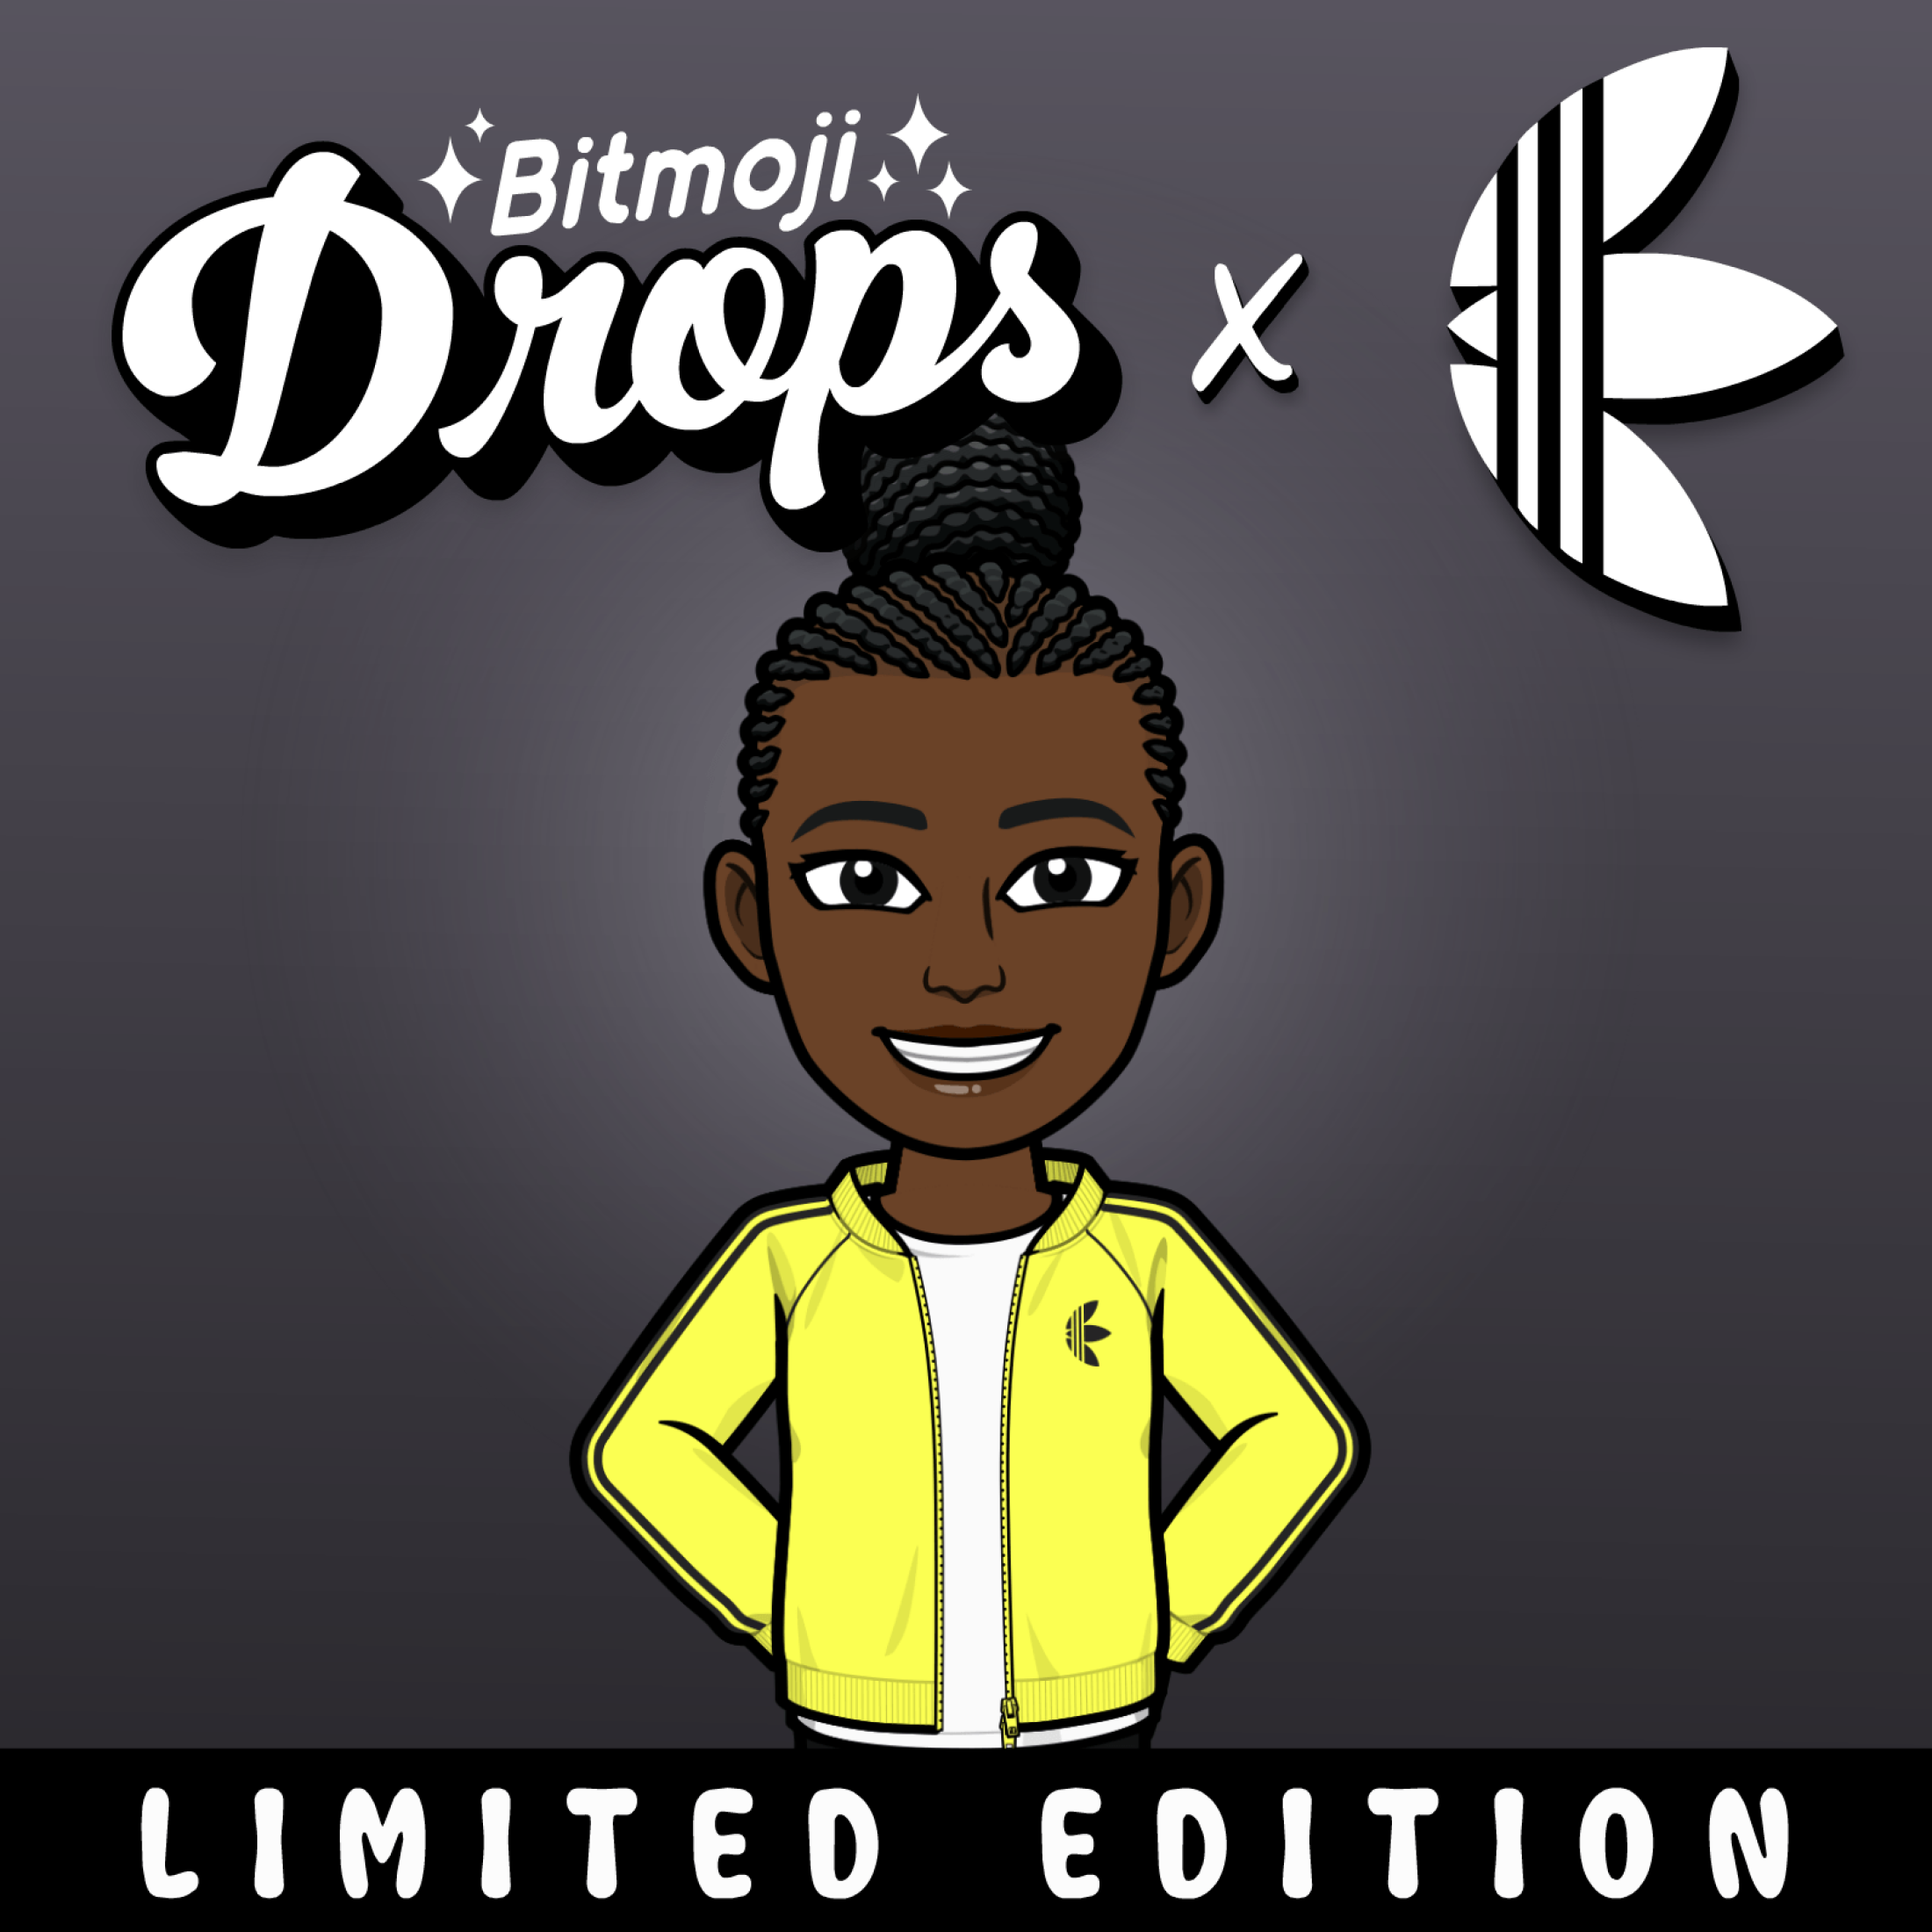 Snapchat’s latest Bitmoji Drop features exclusive Adidas merch, but there’s a price tag